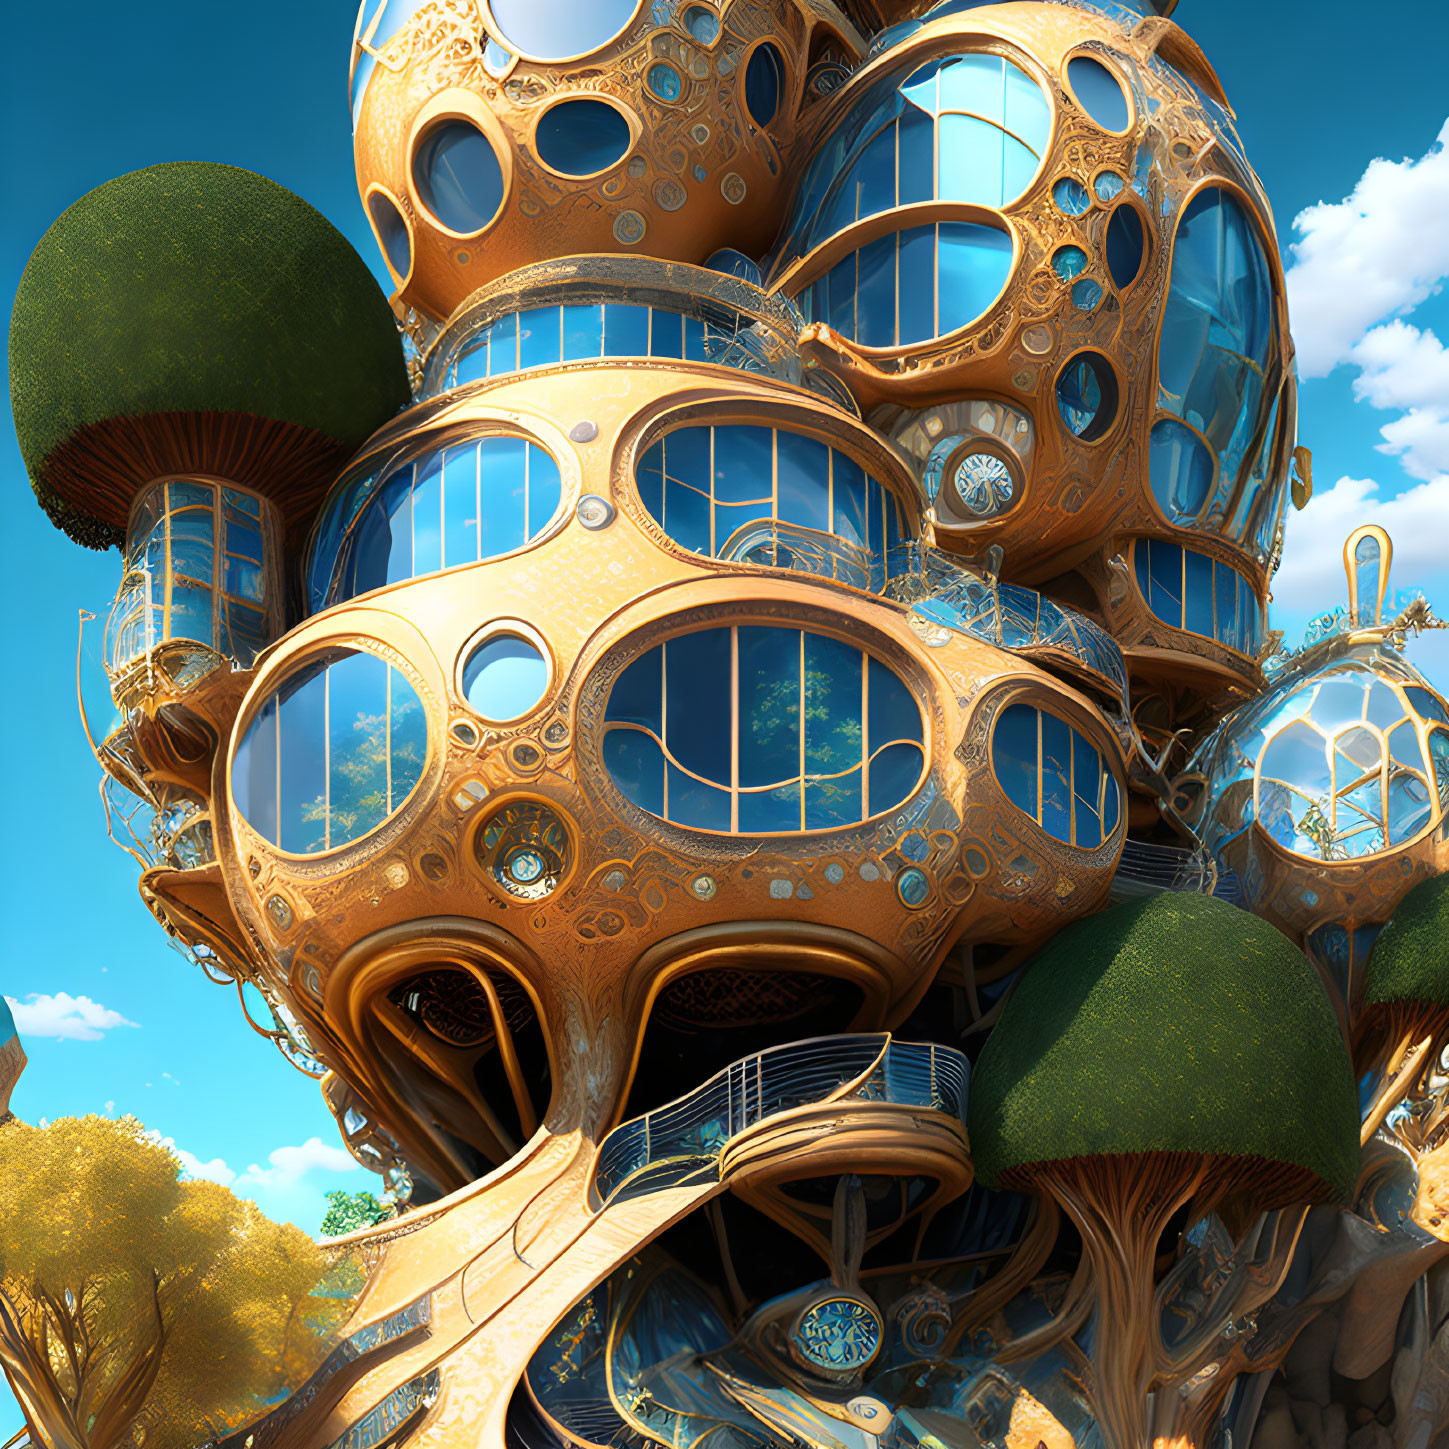 Futuristic treehouse with spherical rooms and large windows